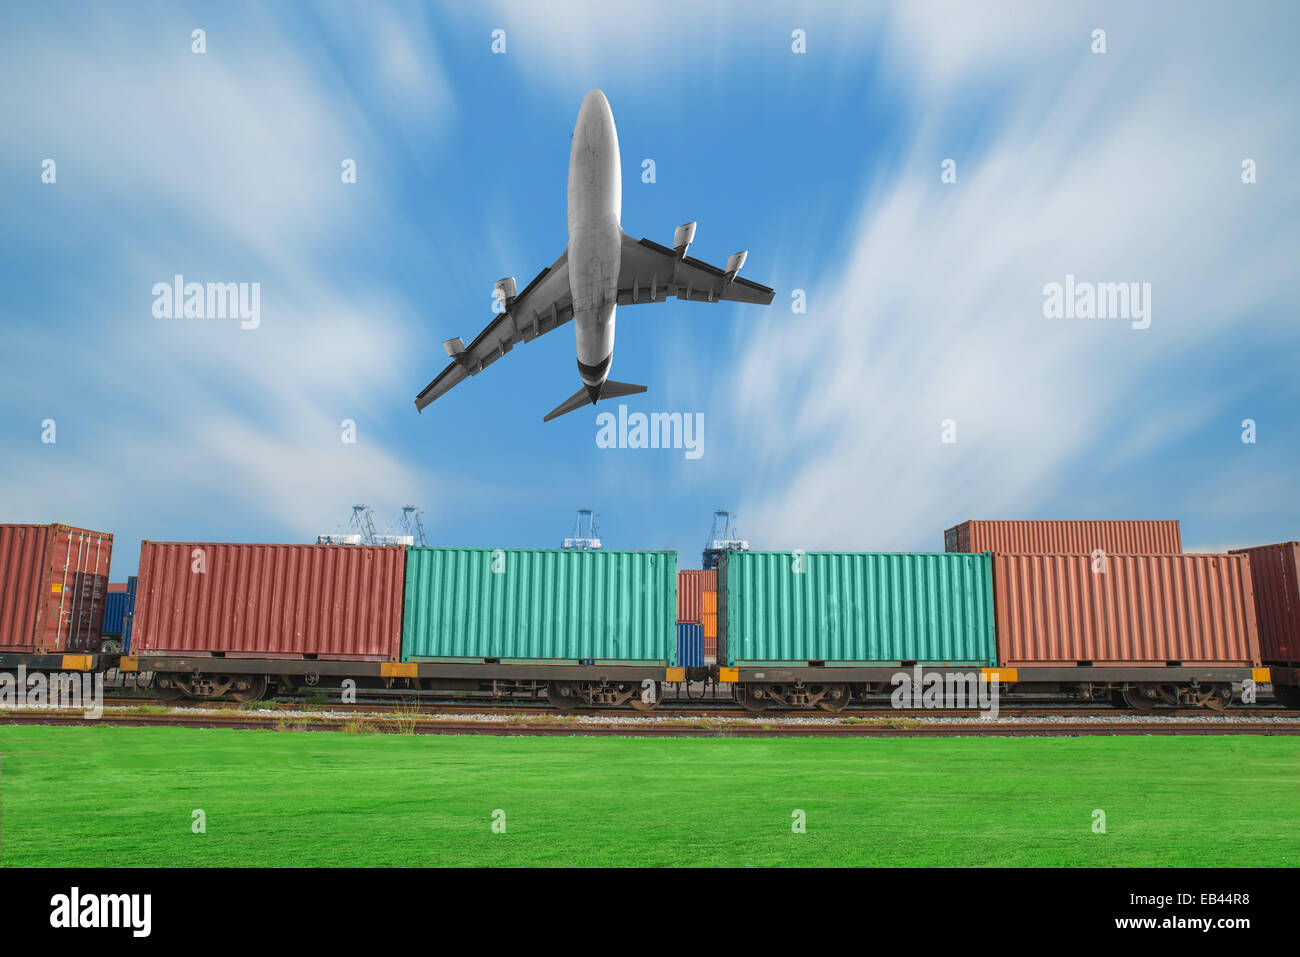 Freight trains in dock with airplane for  logistics background Stock Photo